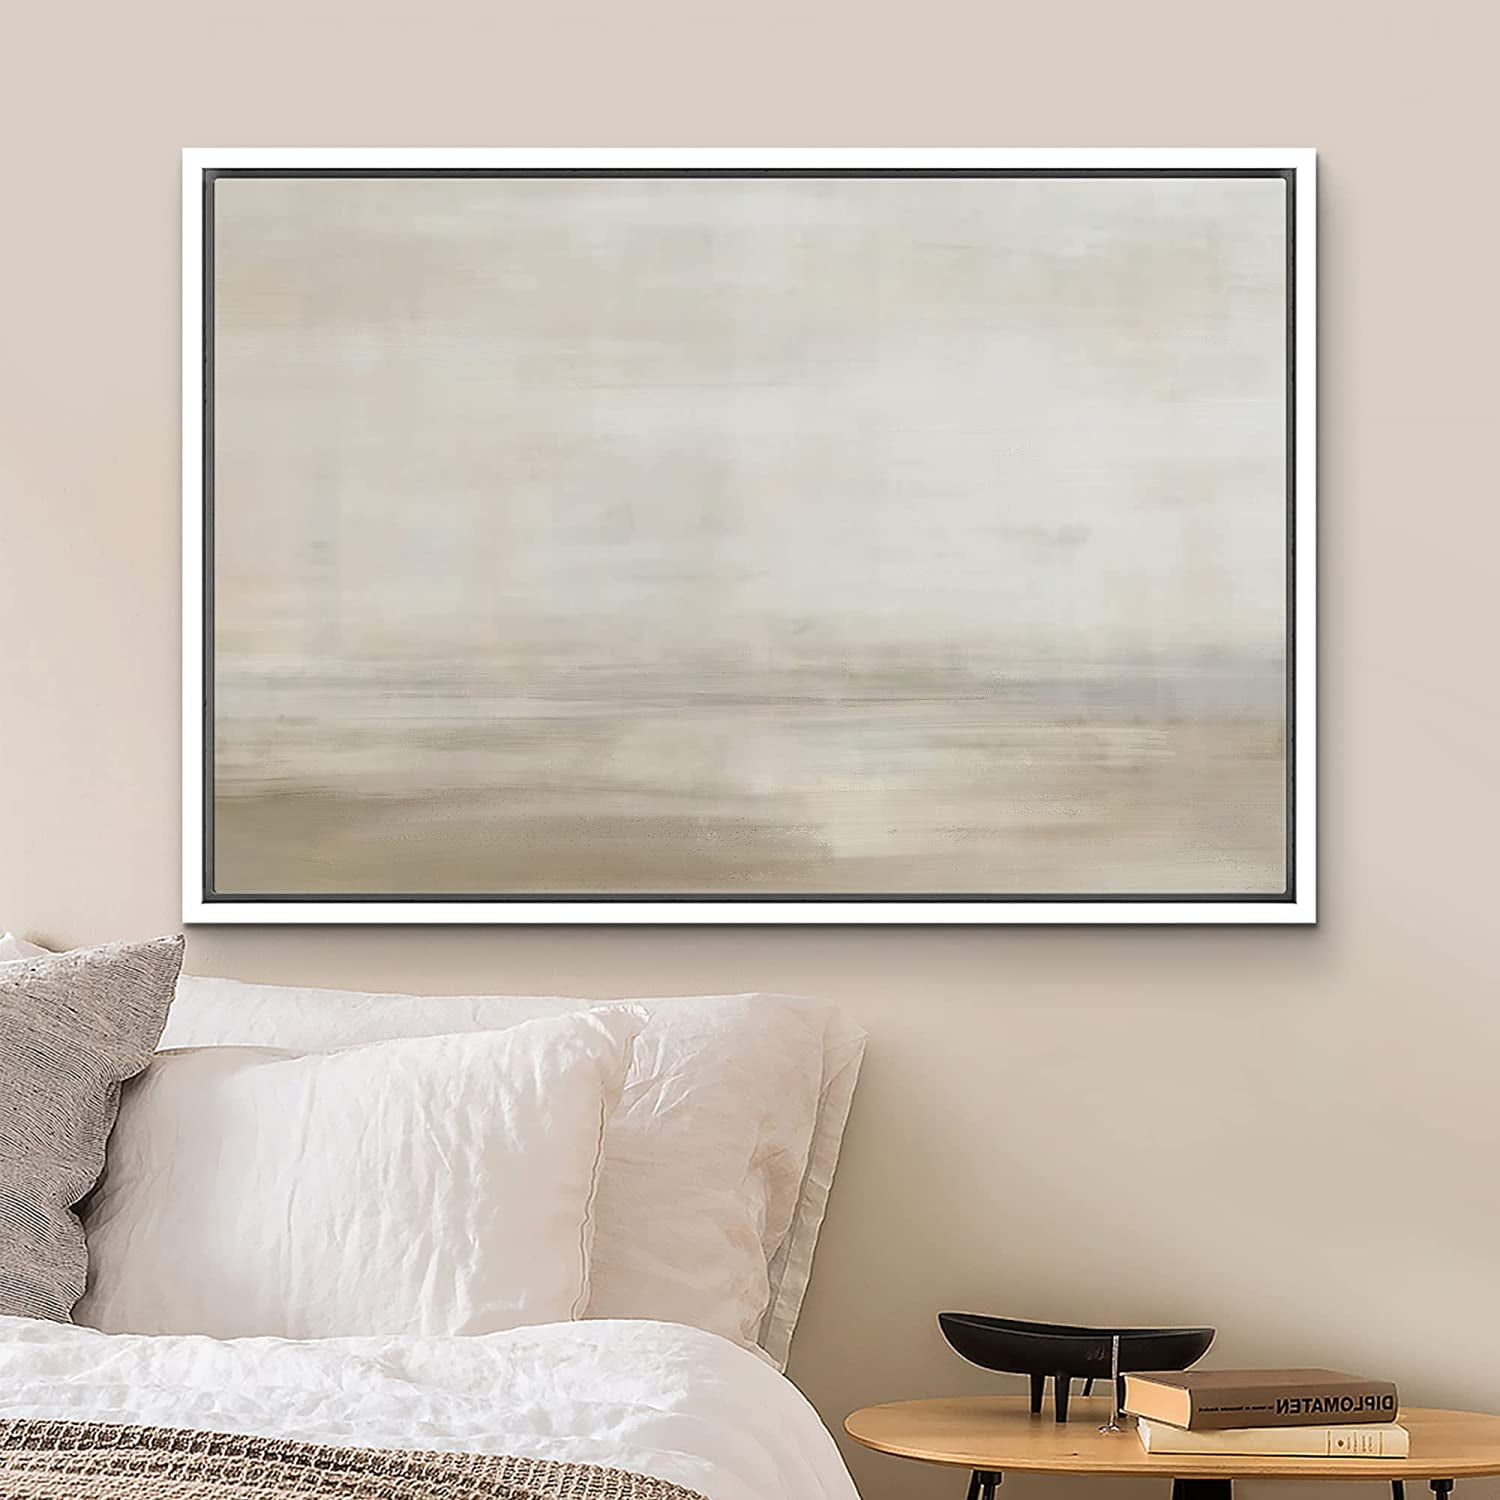 PixonSign Framed Print Wall Art Grunge Pastel Watercolor Vista Abstract Shapes Illustrations Modern Decorative Minimal Relax/Calm for Living Room, Bedroom, Office - 24"x36" White - Walmart.com